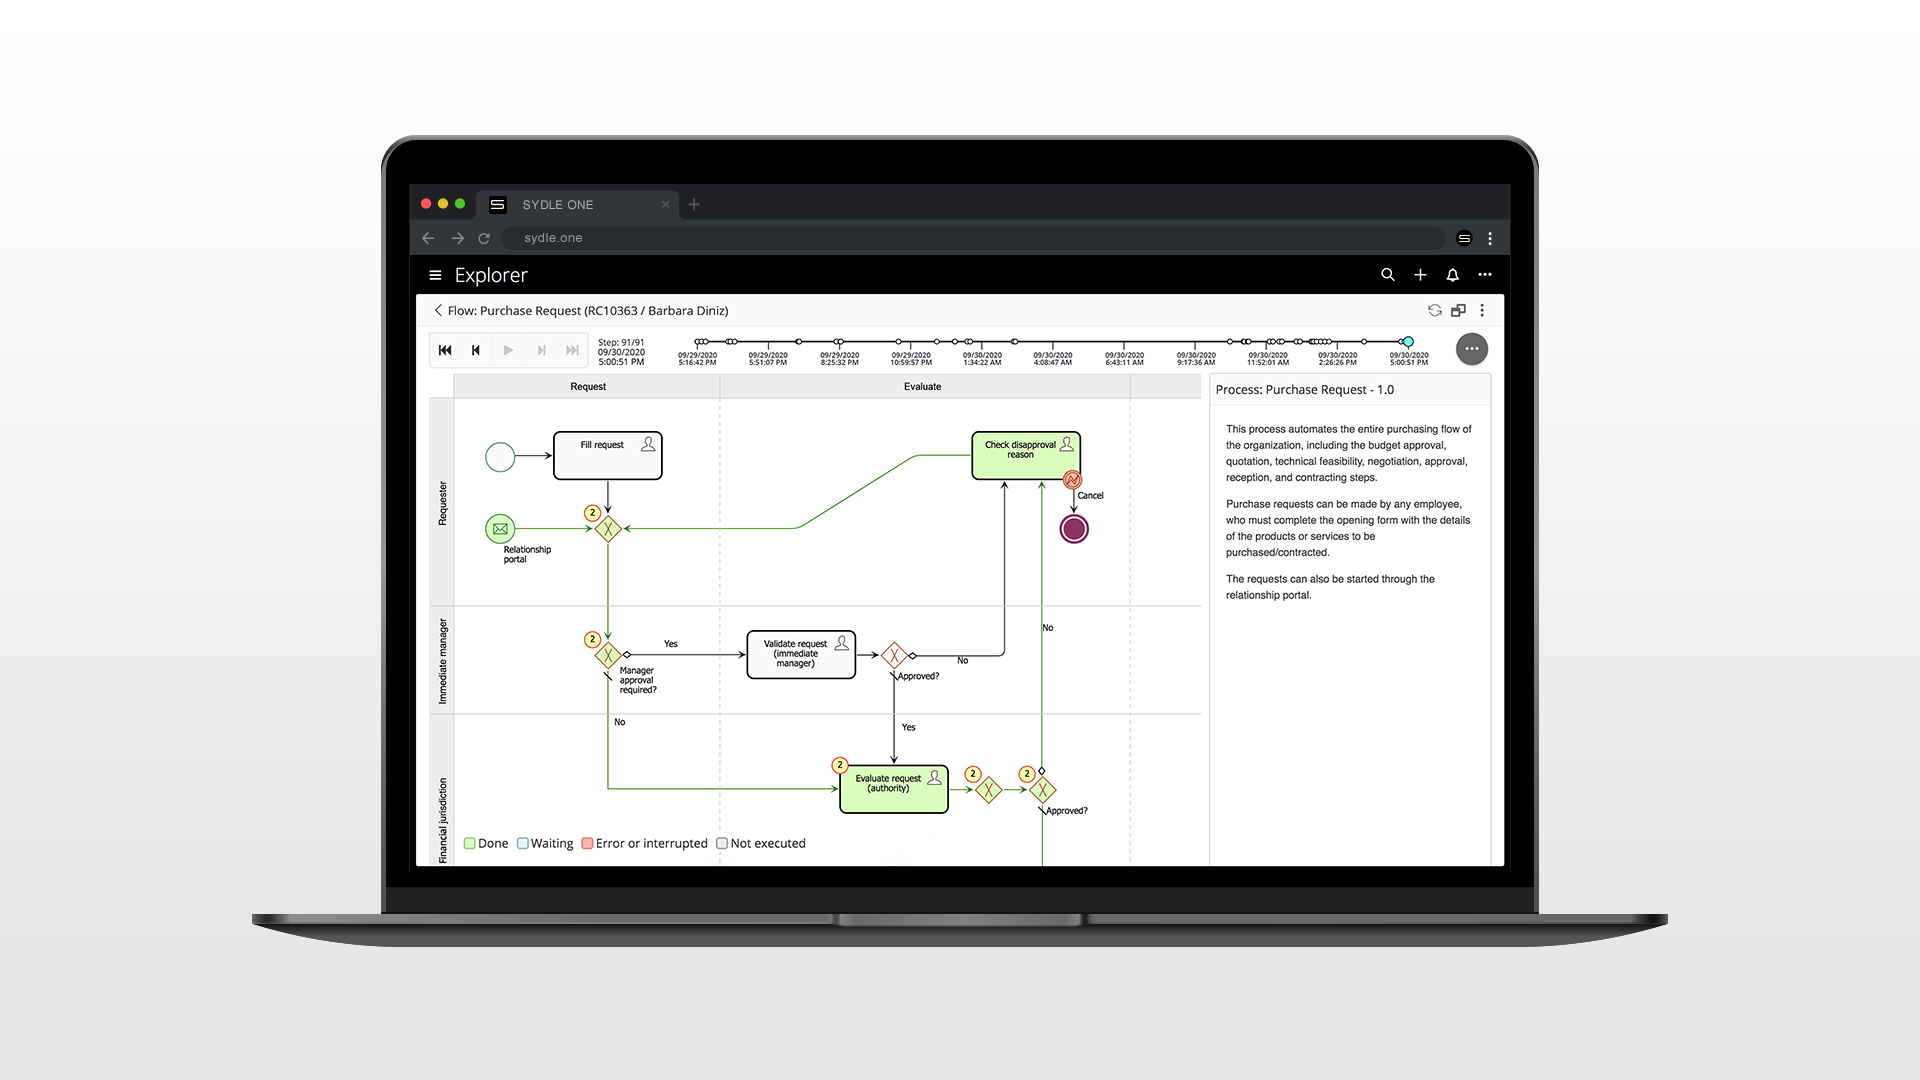 Full process management and automation in the cloud. Model, document, automate, execute, and manage all your organization’s processes. Explore 360-degree views and see all the information related to a customer, employee, partner, and others.